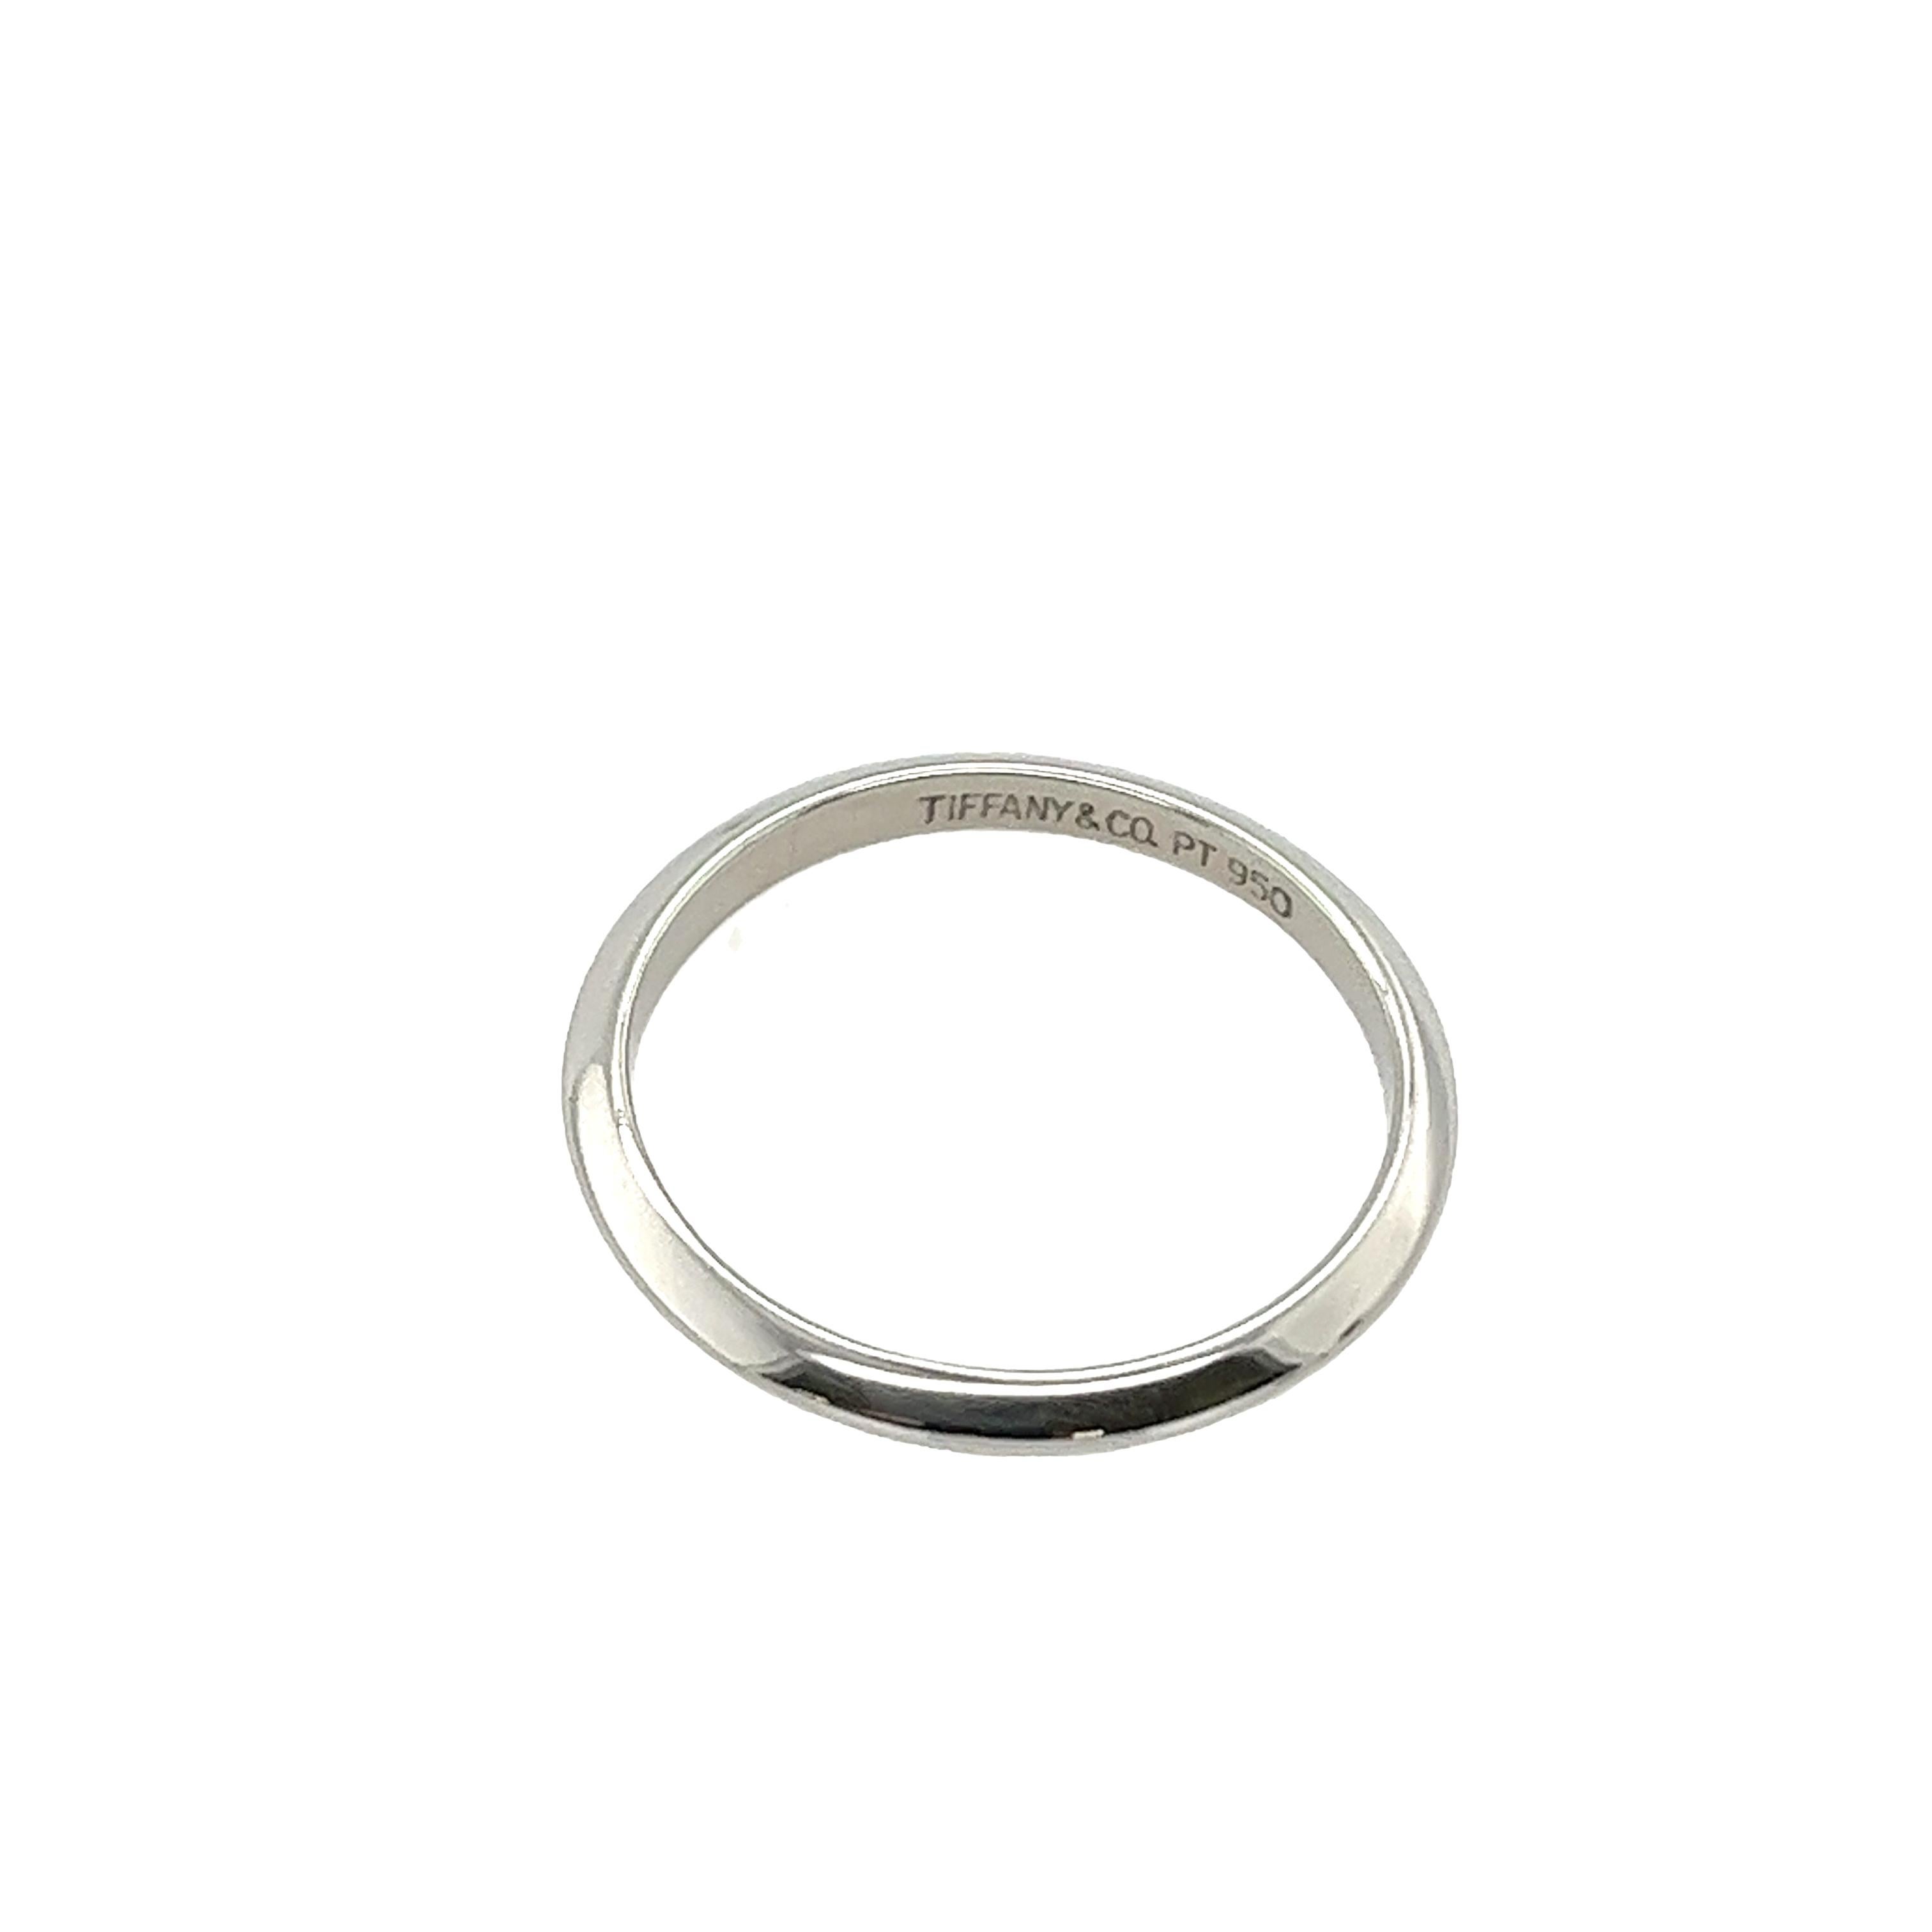 Tiffany & Co. Platinum Wedding Band Ring For Sale 1